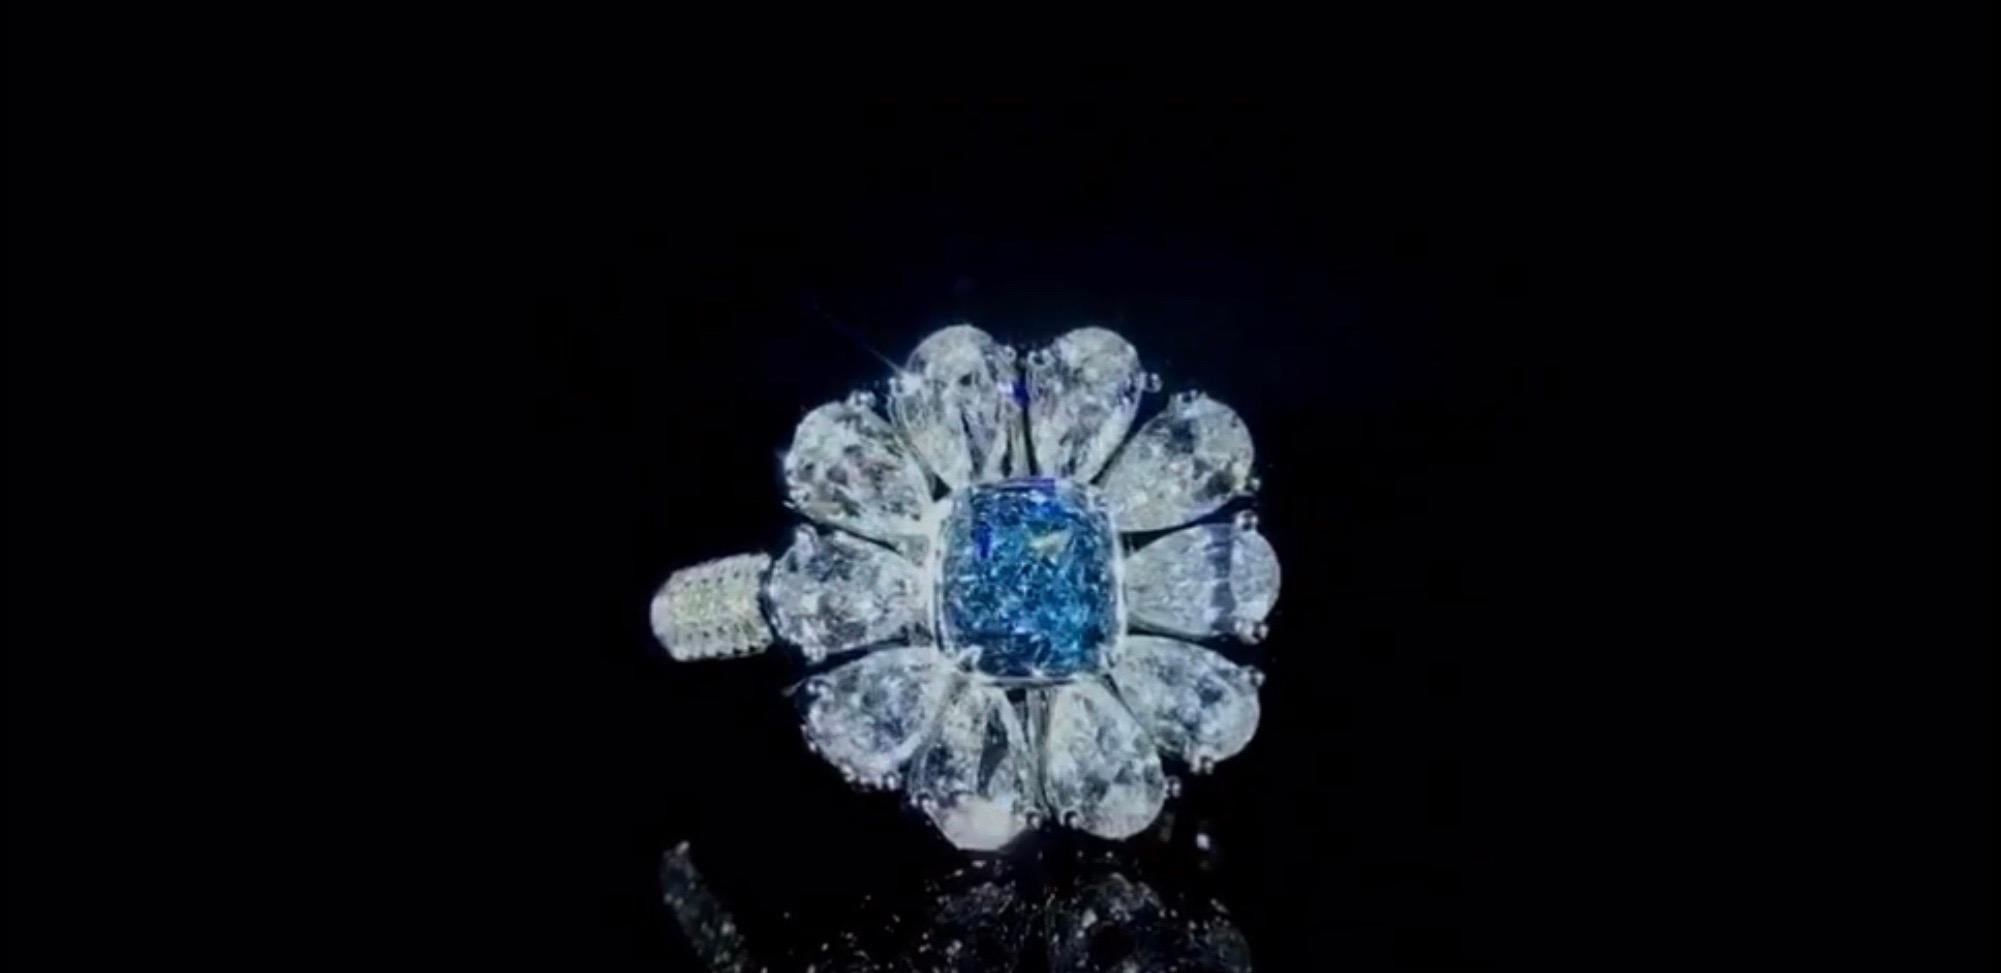 From the Emilio Jewelry Museum Vault, Showcasing a magnificent investment grade .80ct carat Gia certified natural fancy light g. blue center stone. With Emilio's expertise after setting the center faces up with a visual of fancy intense blue!